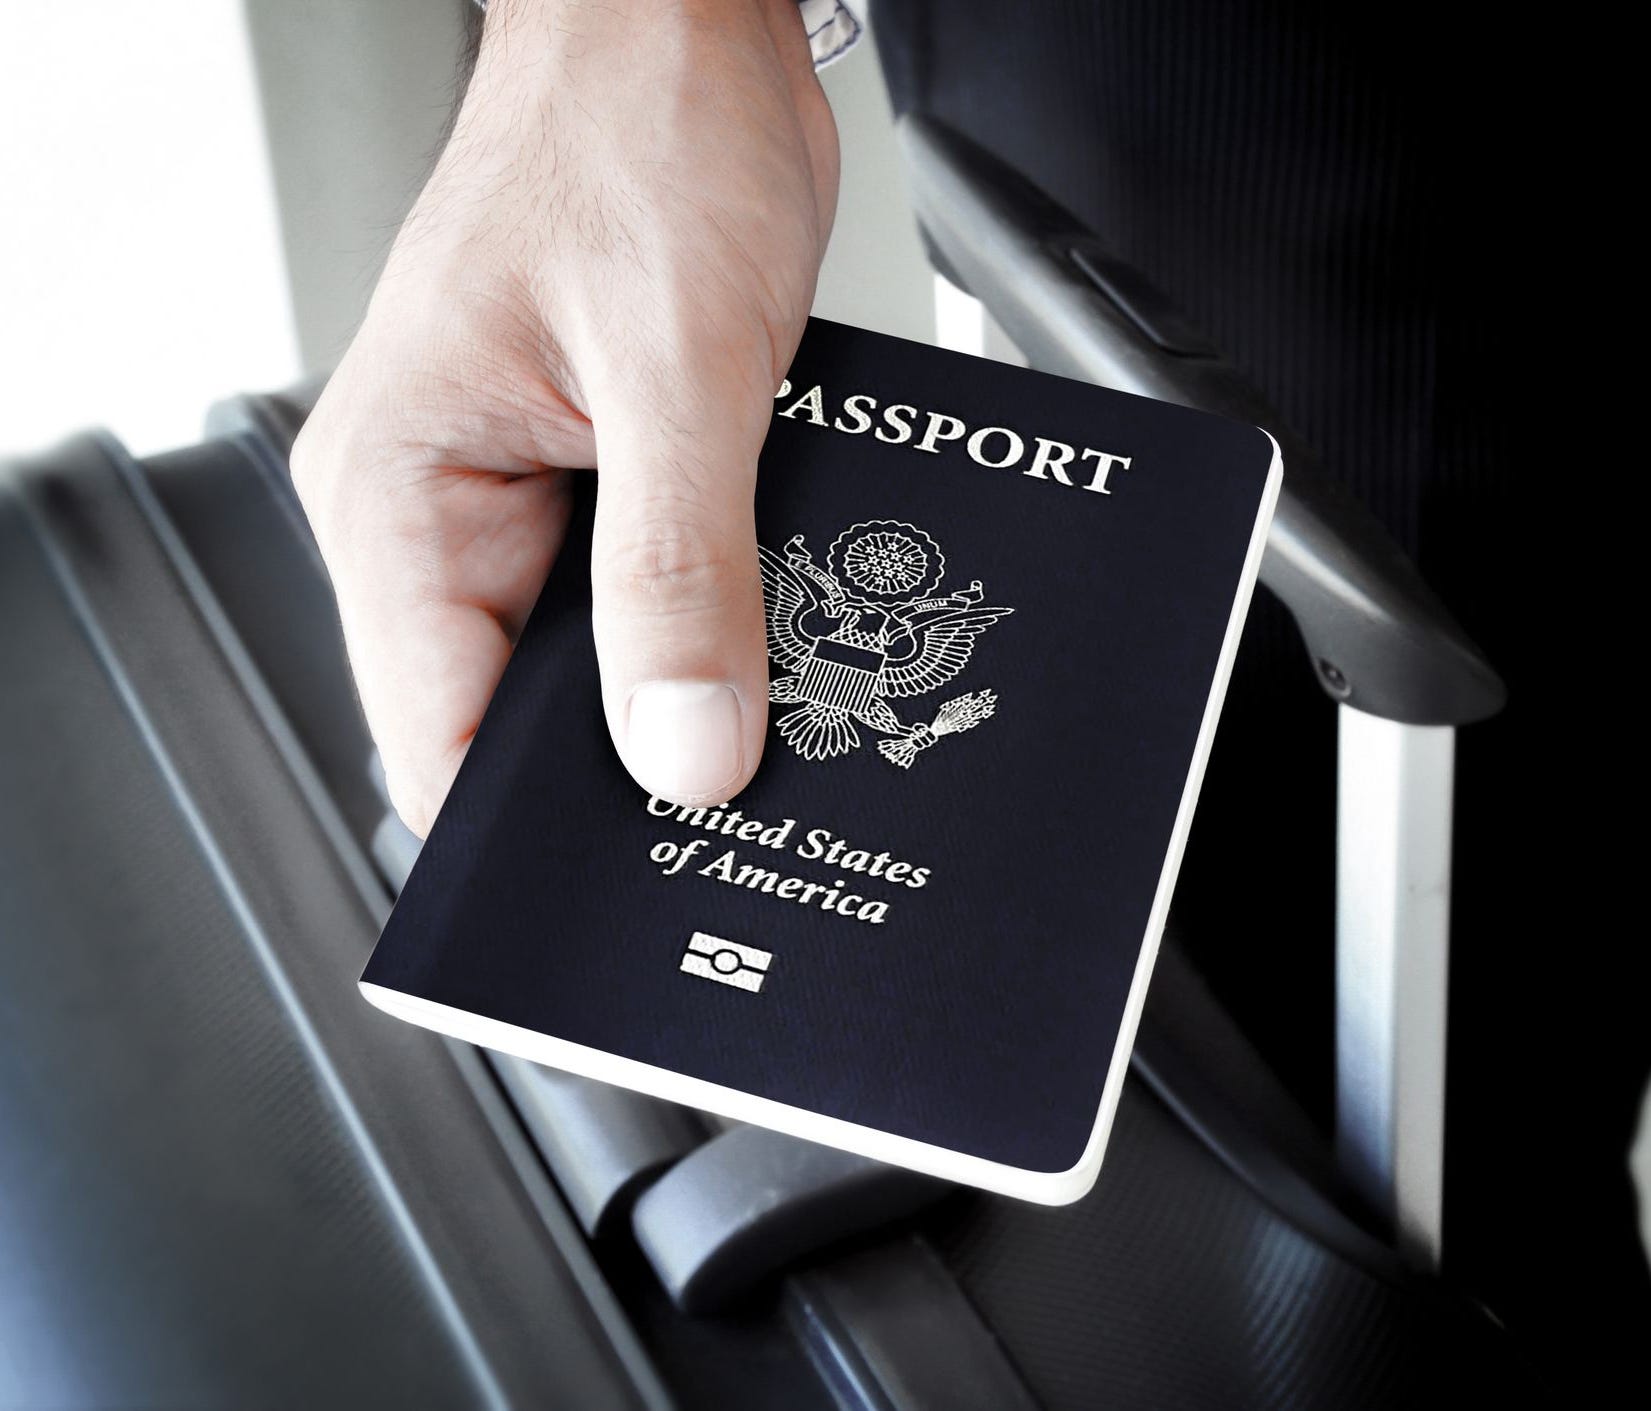 U.S. passport fees are going up $10 on April 2.